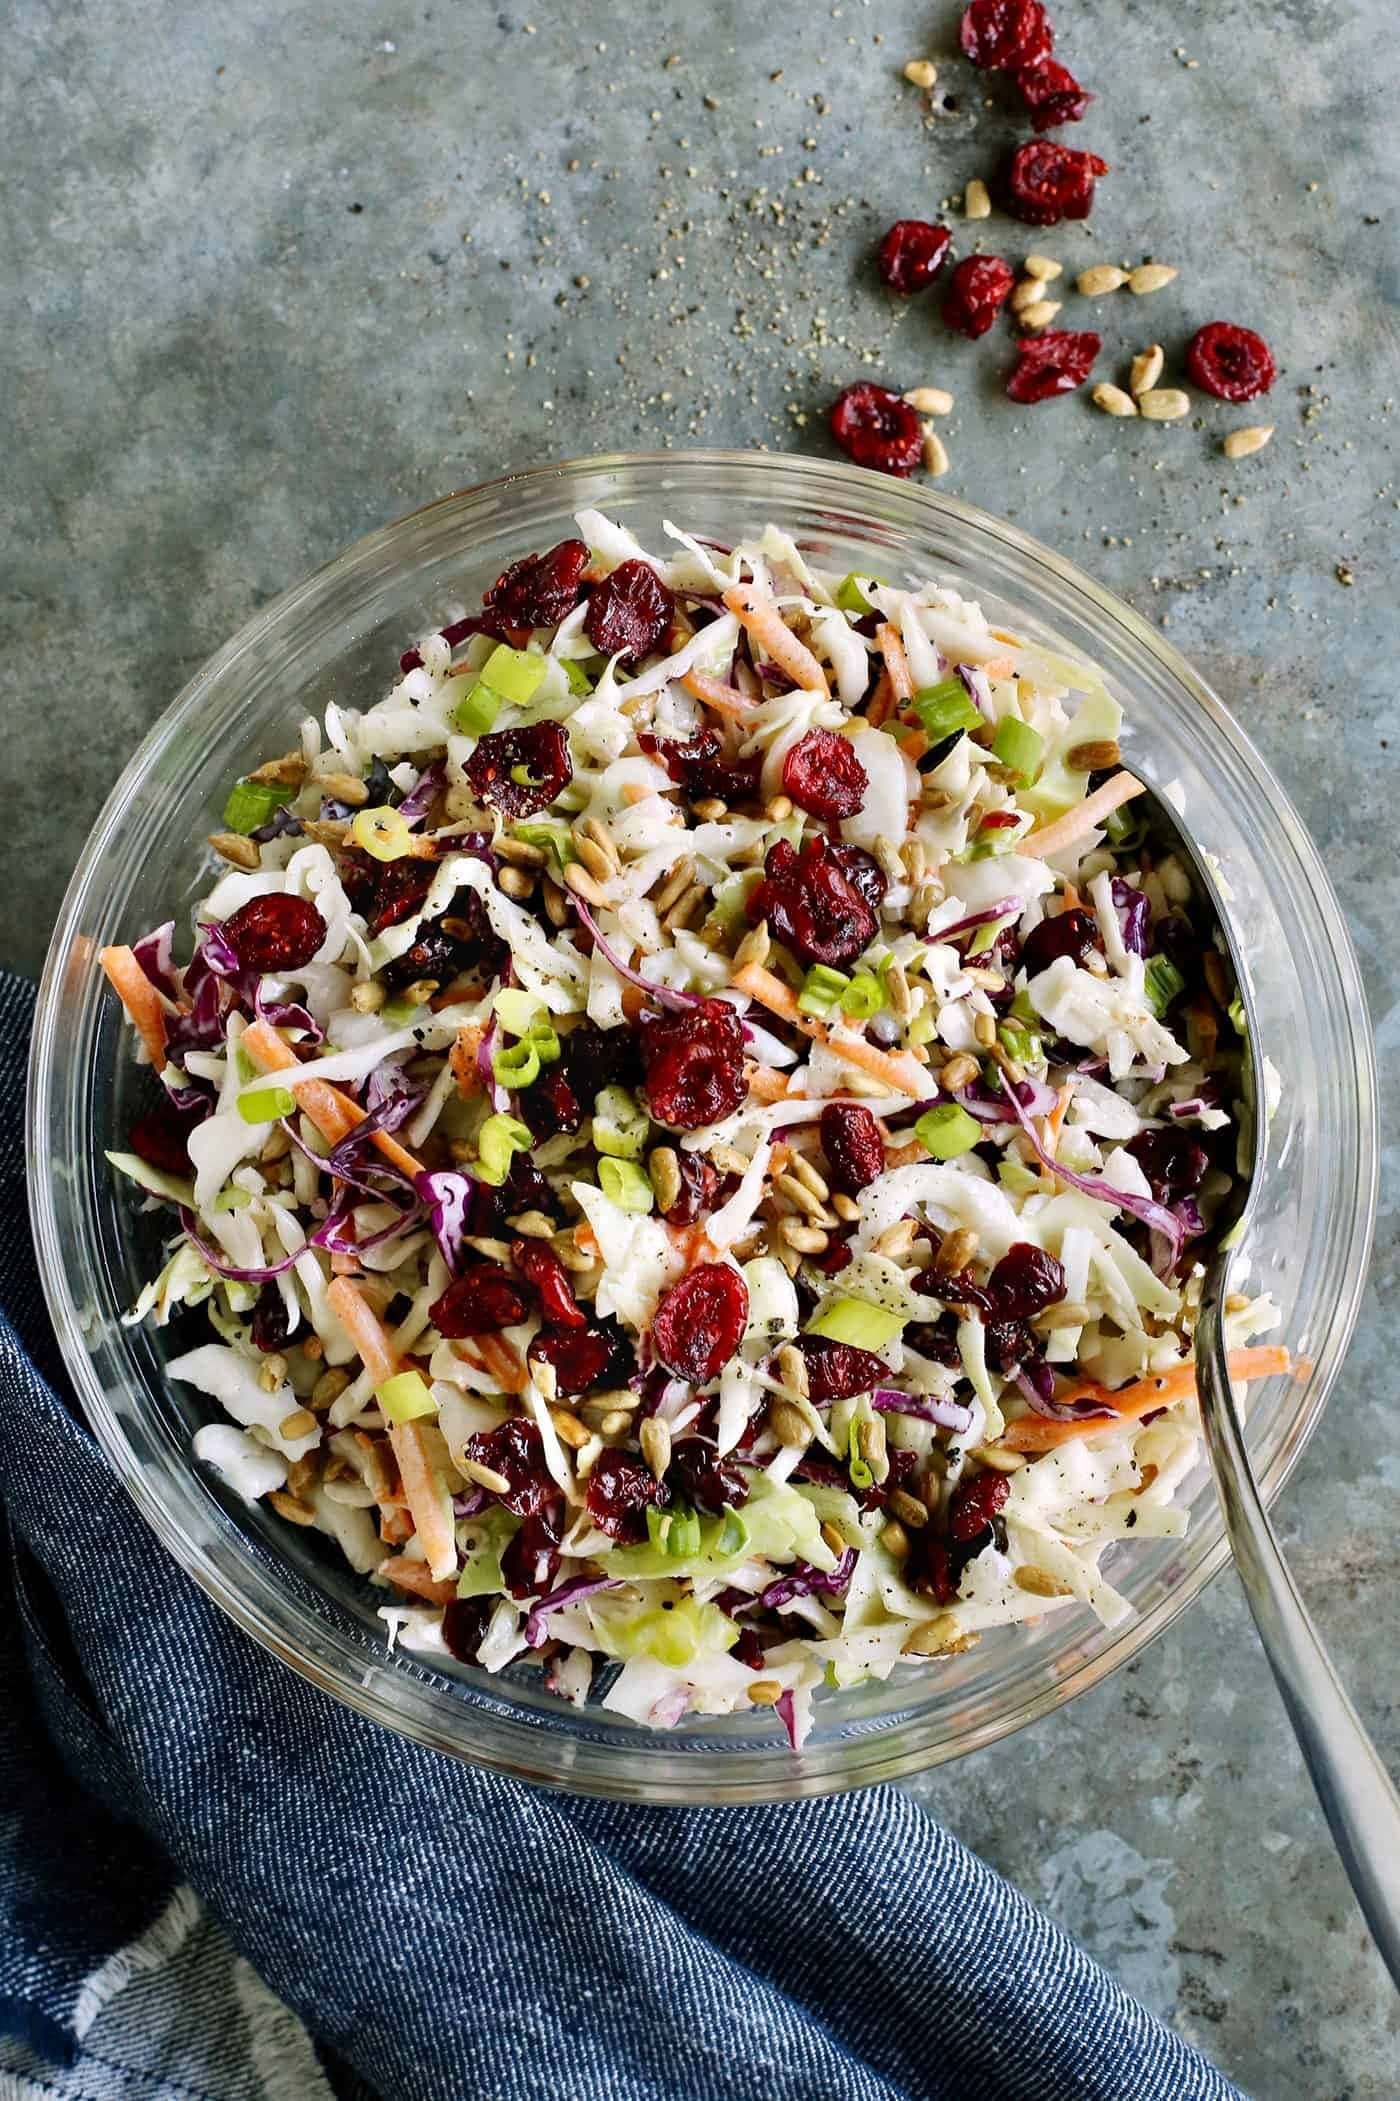 Bowl of homemade Cranberry Coleslaw with shredded cabbage, carrots,  green onions, dried cranberries and sunflower kernels